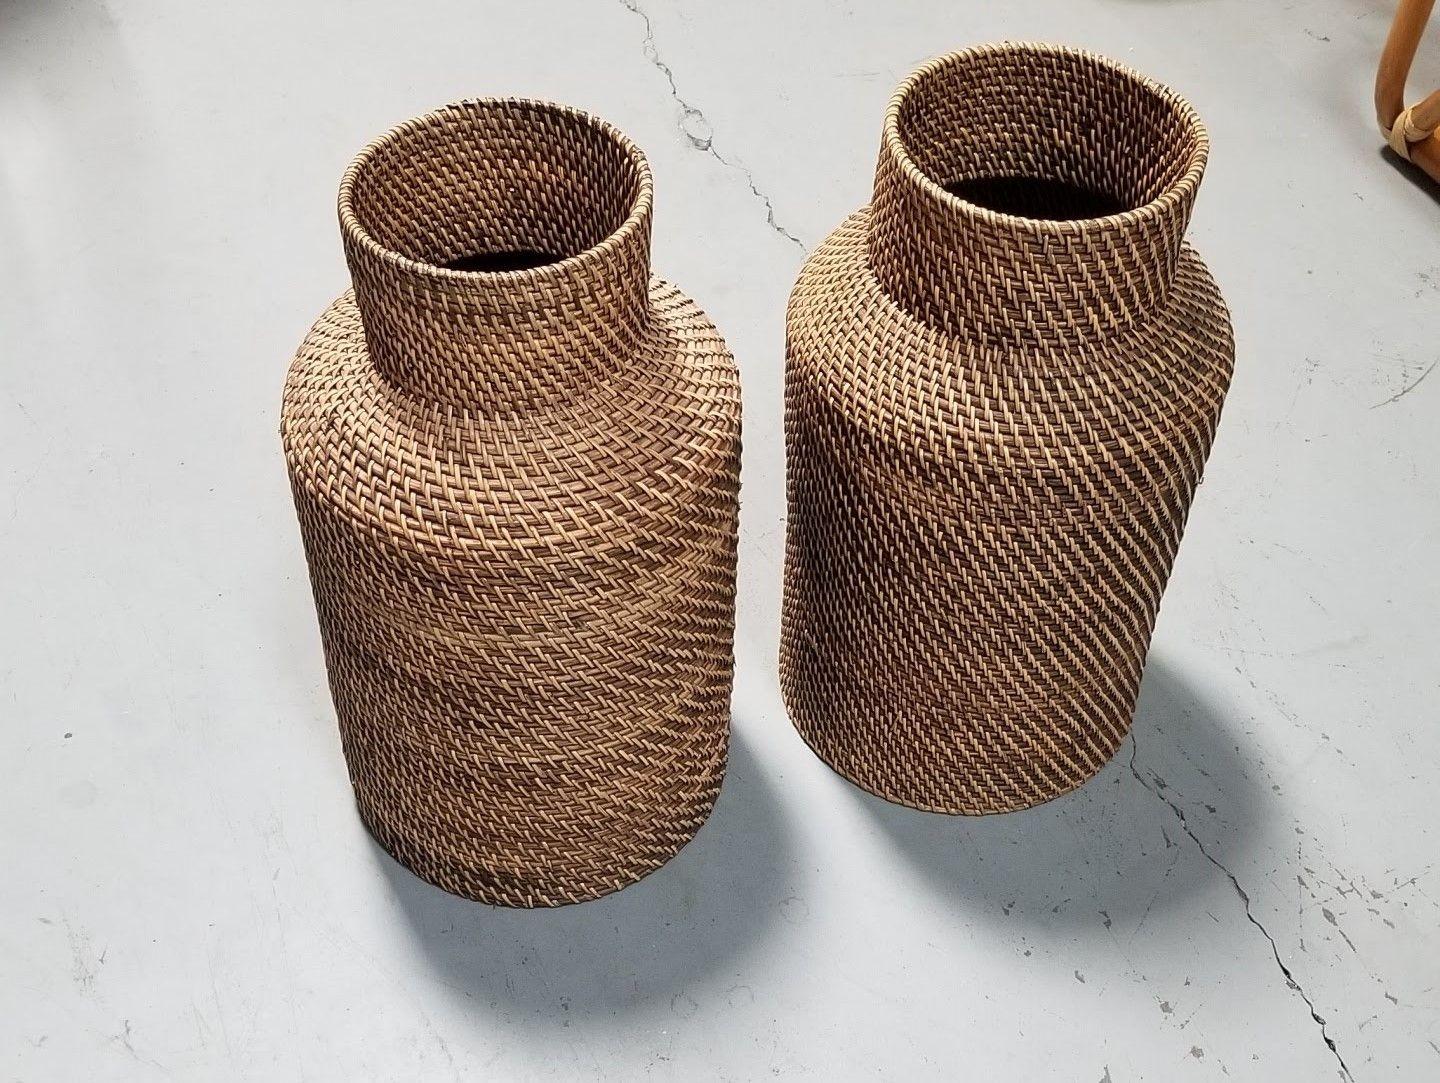 Small pair of Gabriella Crespi-styled decorative floor vases made from stacked reed pencil rattan rings with wicker weave. Perfect for holding dried plant arrangements or simply standing on its own.

Circa 1970, United States

We only purchase and